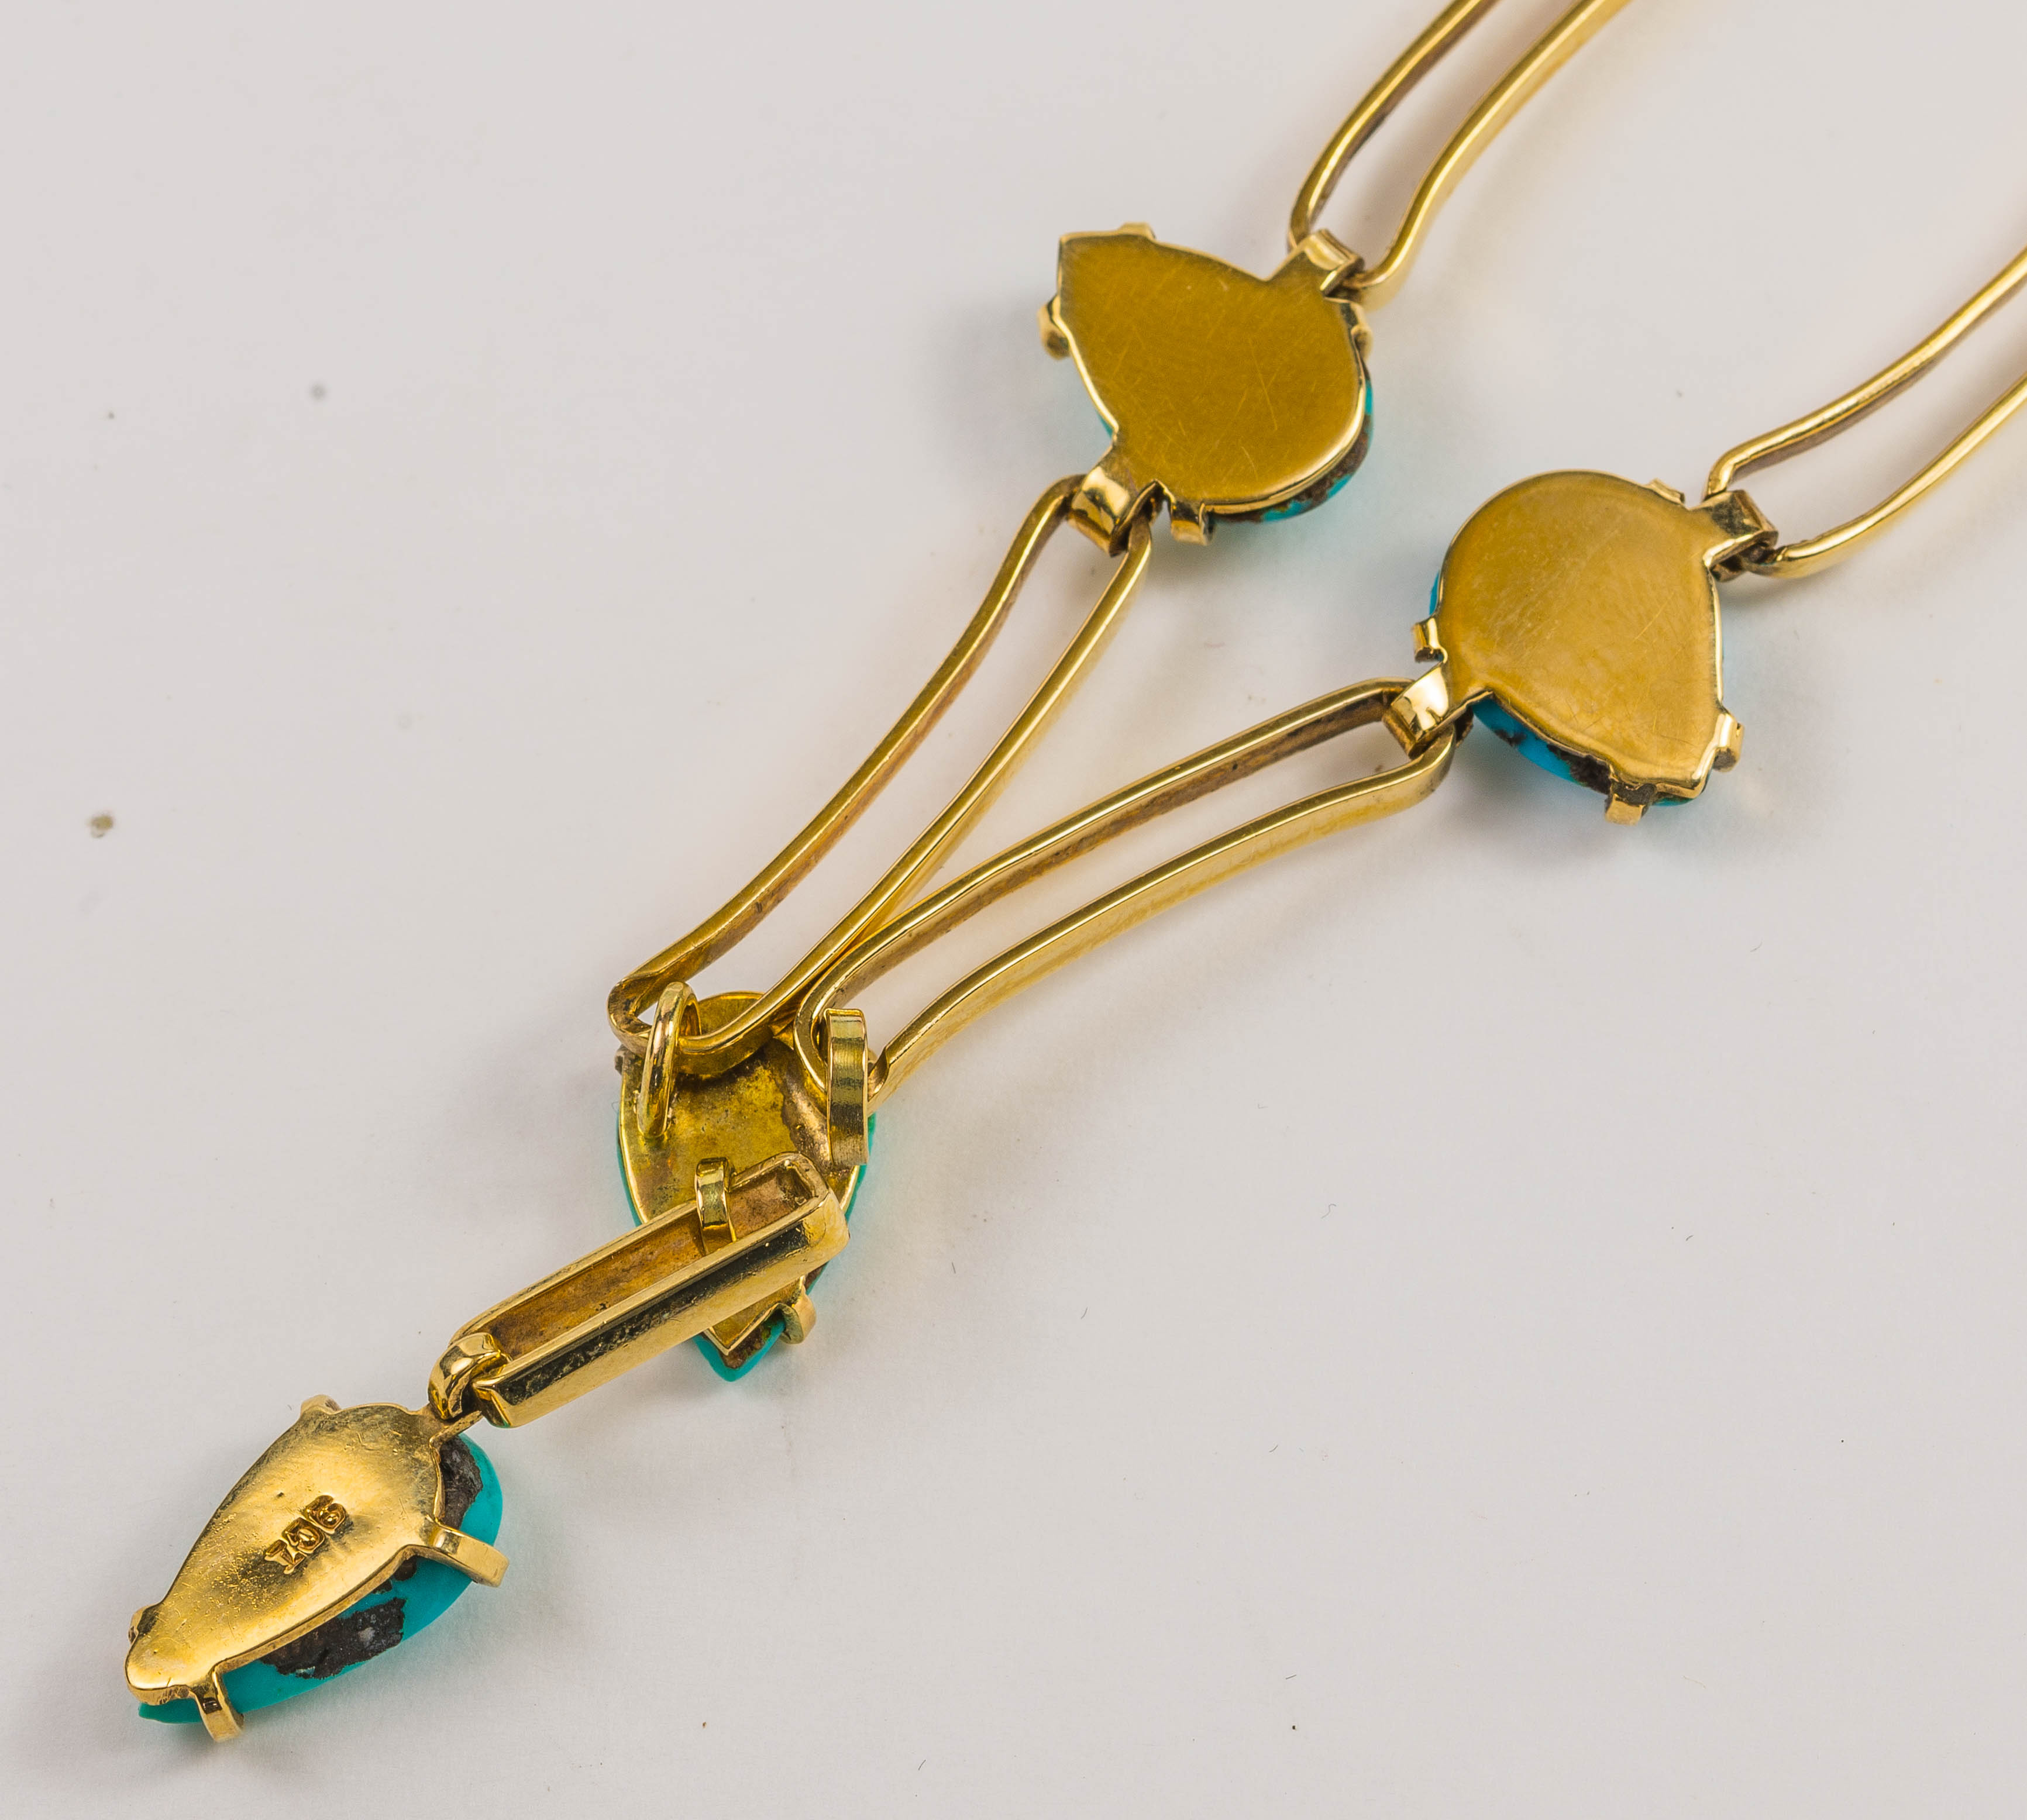 A gold and turquoise necklace, pendant length 9.5cm, necklace length 45cm Wt.11.8g. - Image 2 of 2